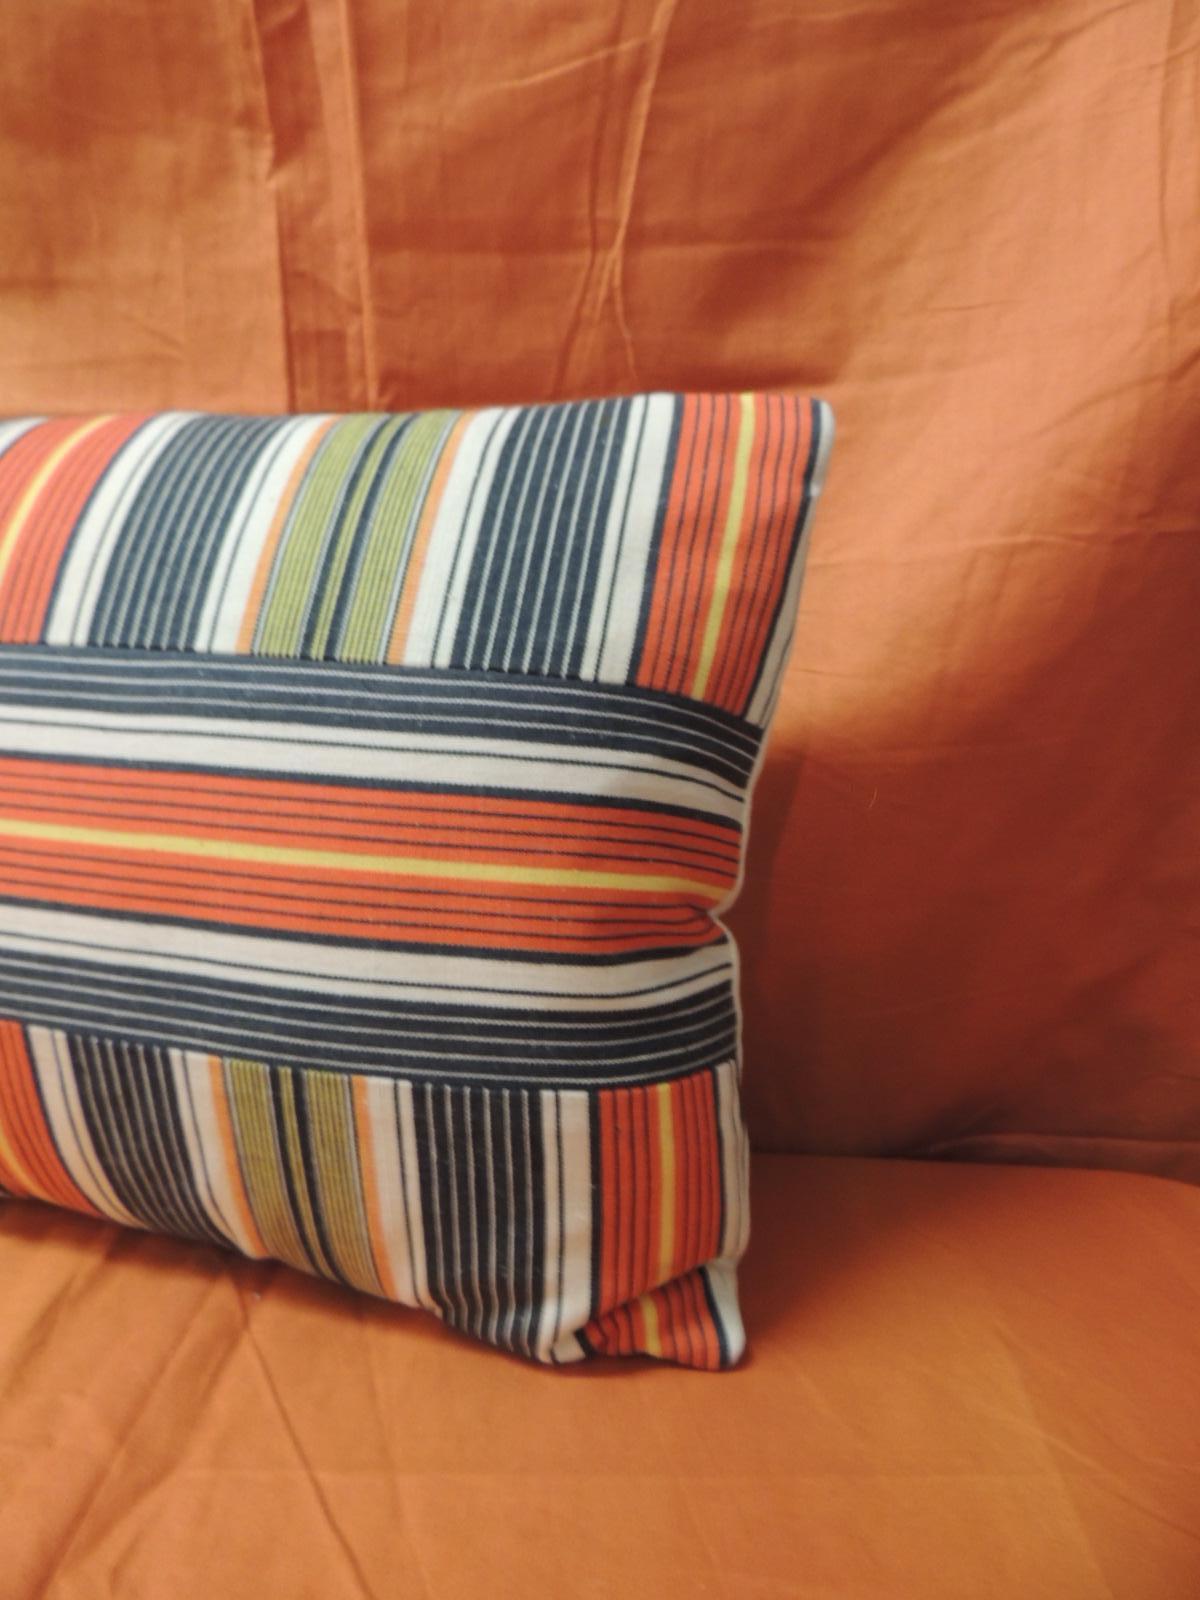 Vintage French provincial linen multi-color stripes decorative lumbar pillow
Decorative lumbar pillow handmade with a with vintage French provincial linen with multi-color custom designed stripes to create a more modern layout. In shades of orange,